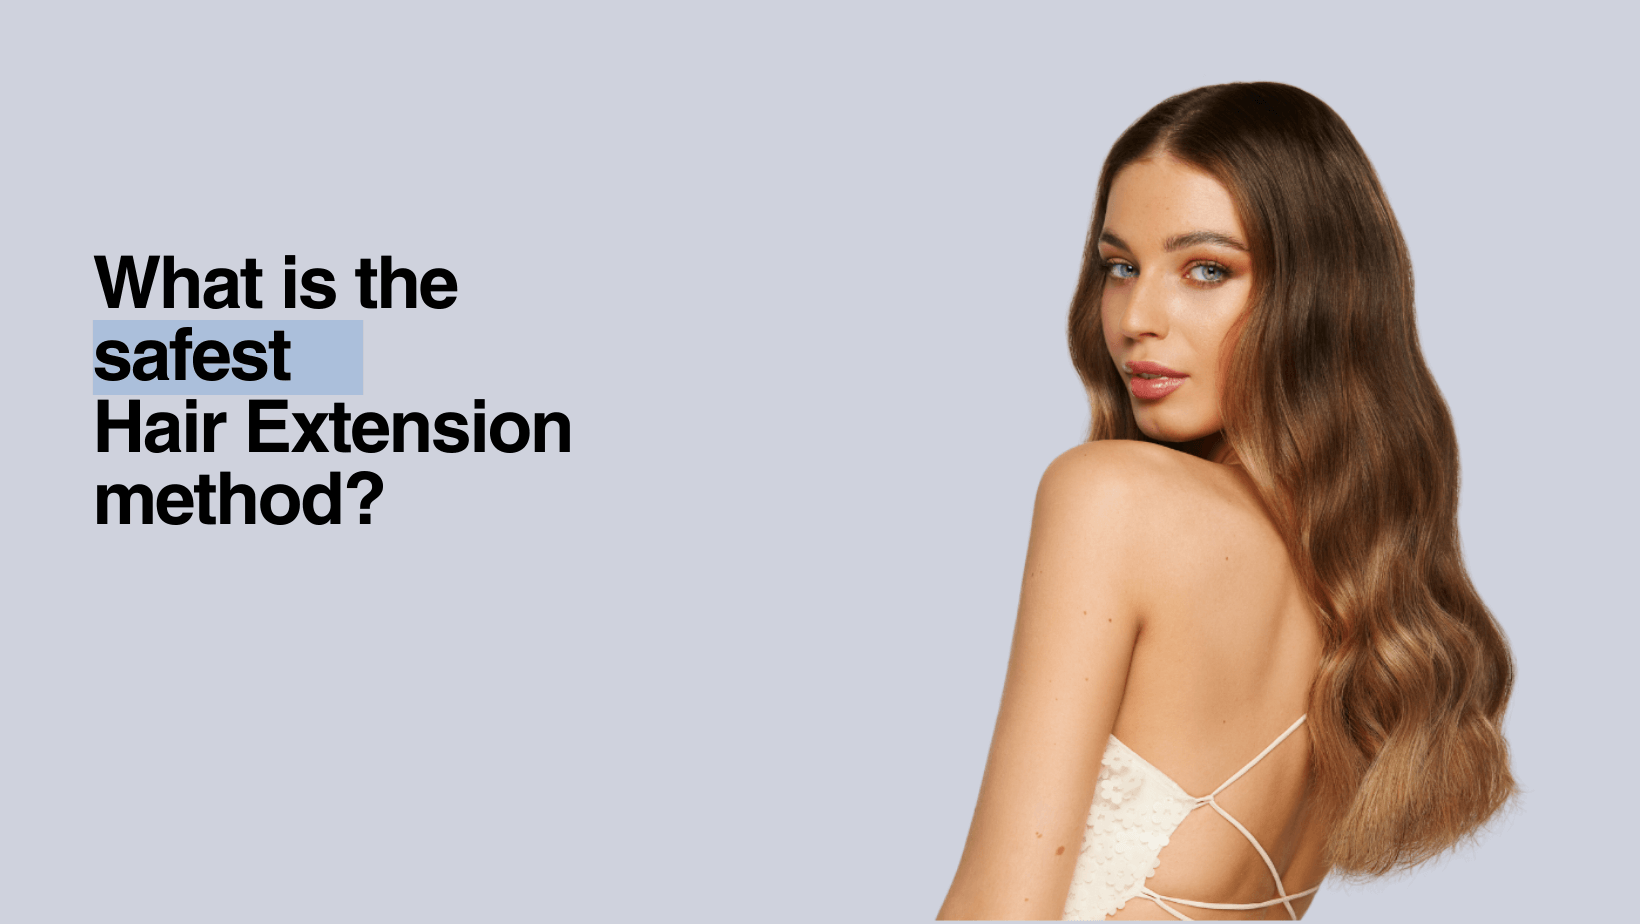 What Is The Safest Hair Extension Method?